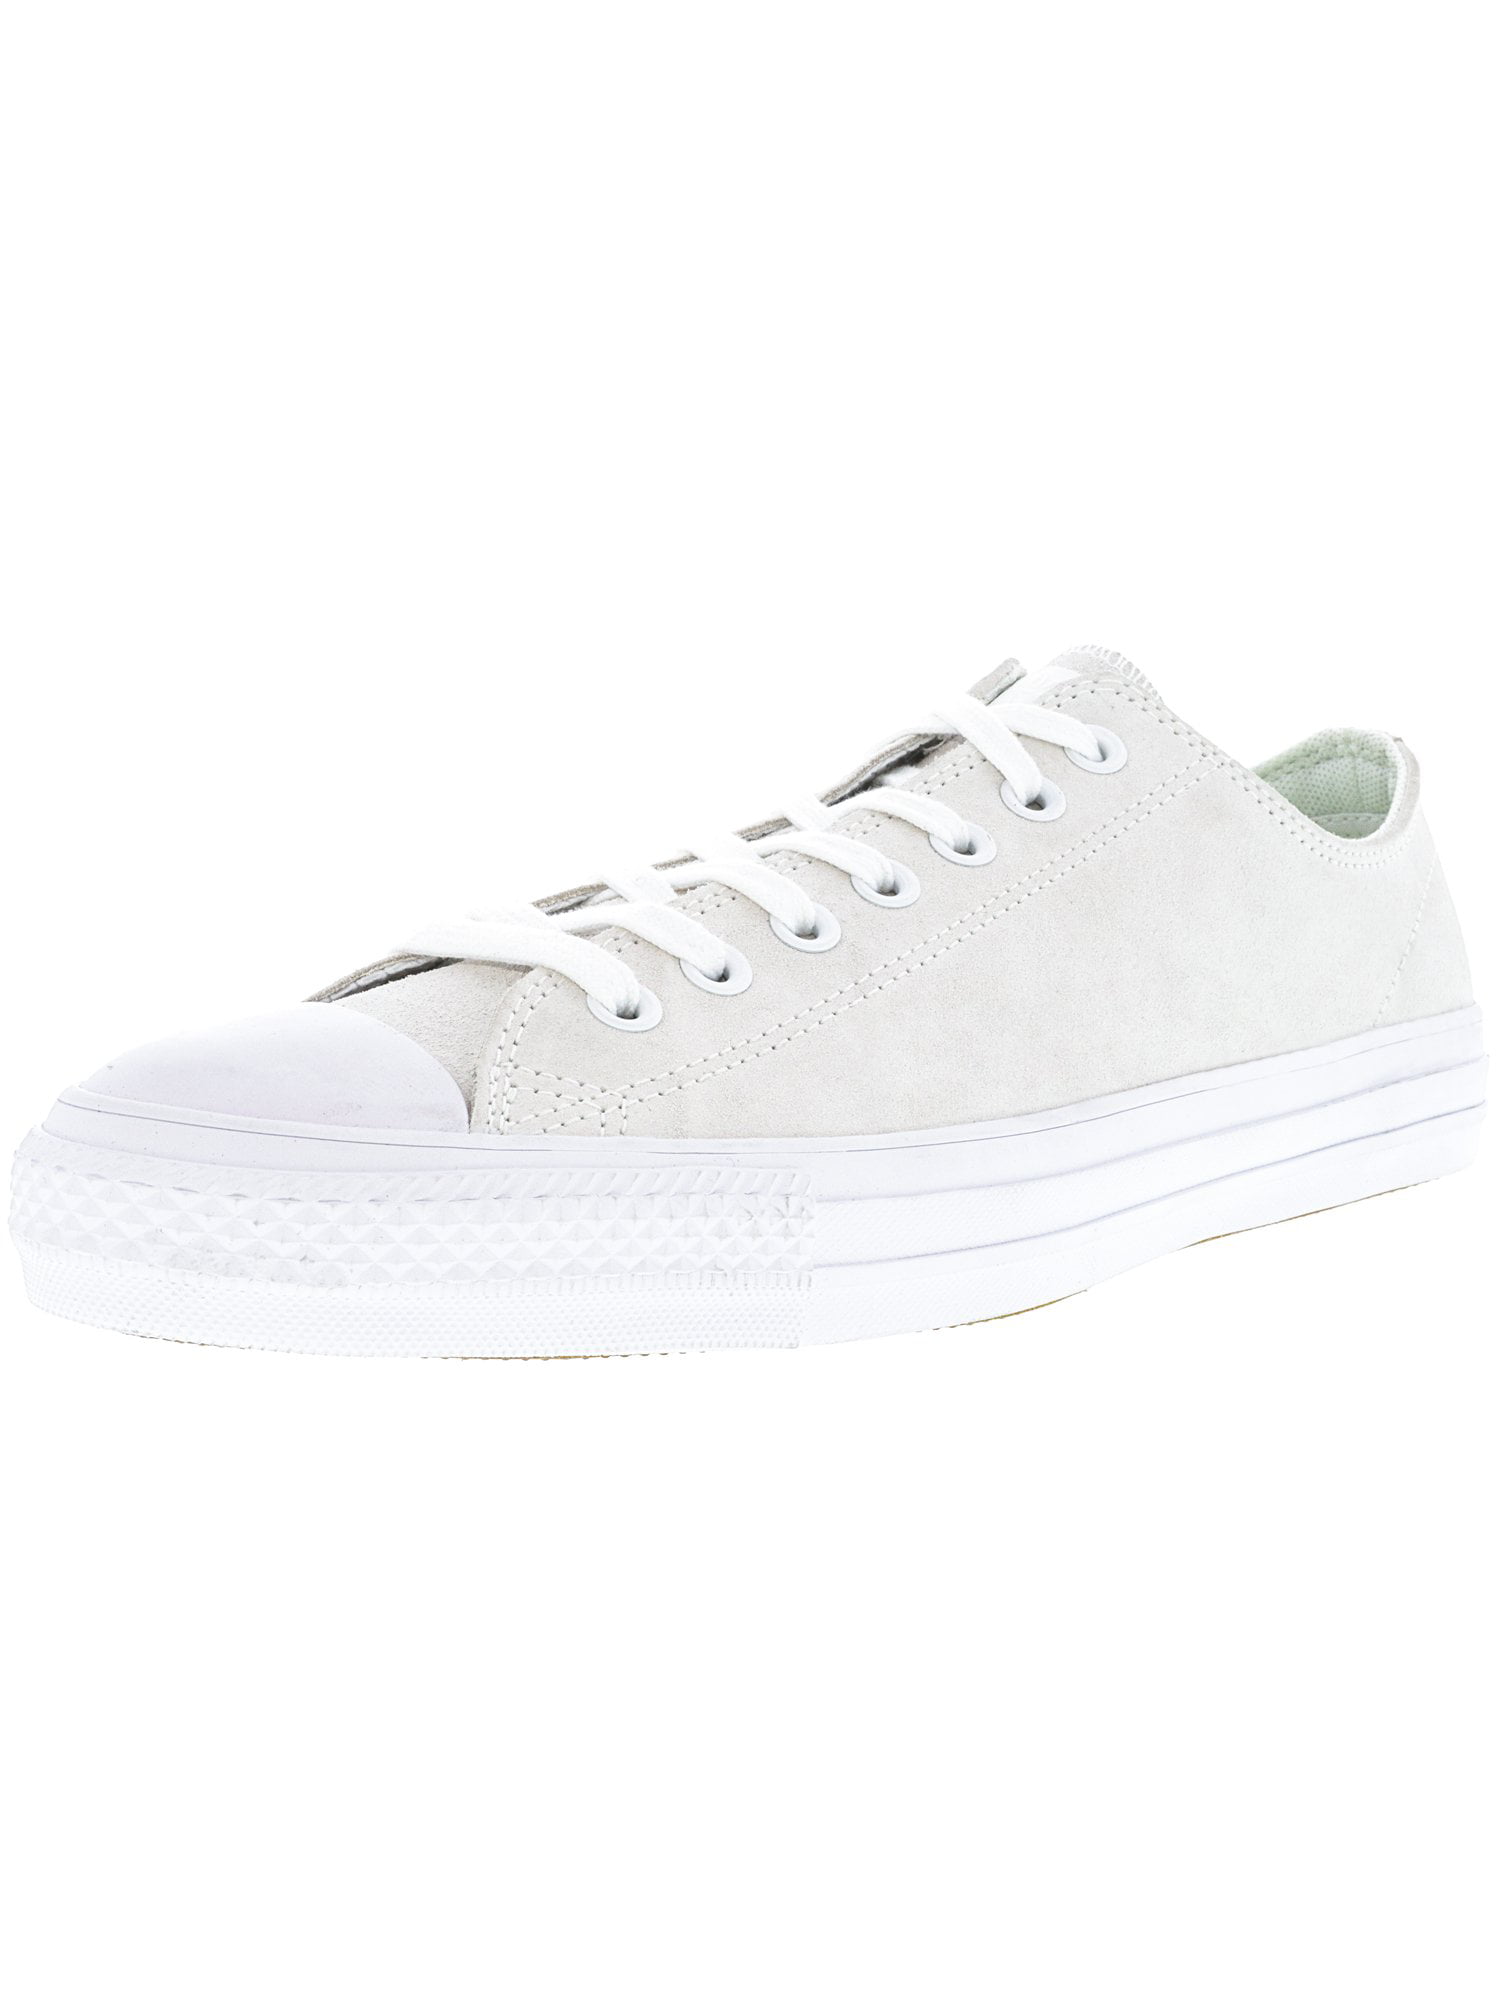 Converse All Star Pro Ox White / Teal Low Top Suede Skateboarding Shoe ...